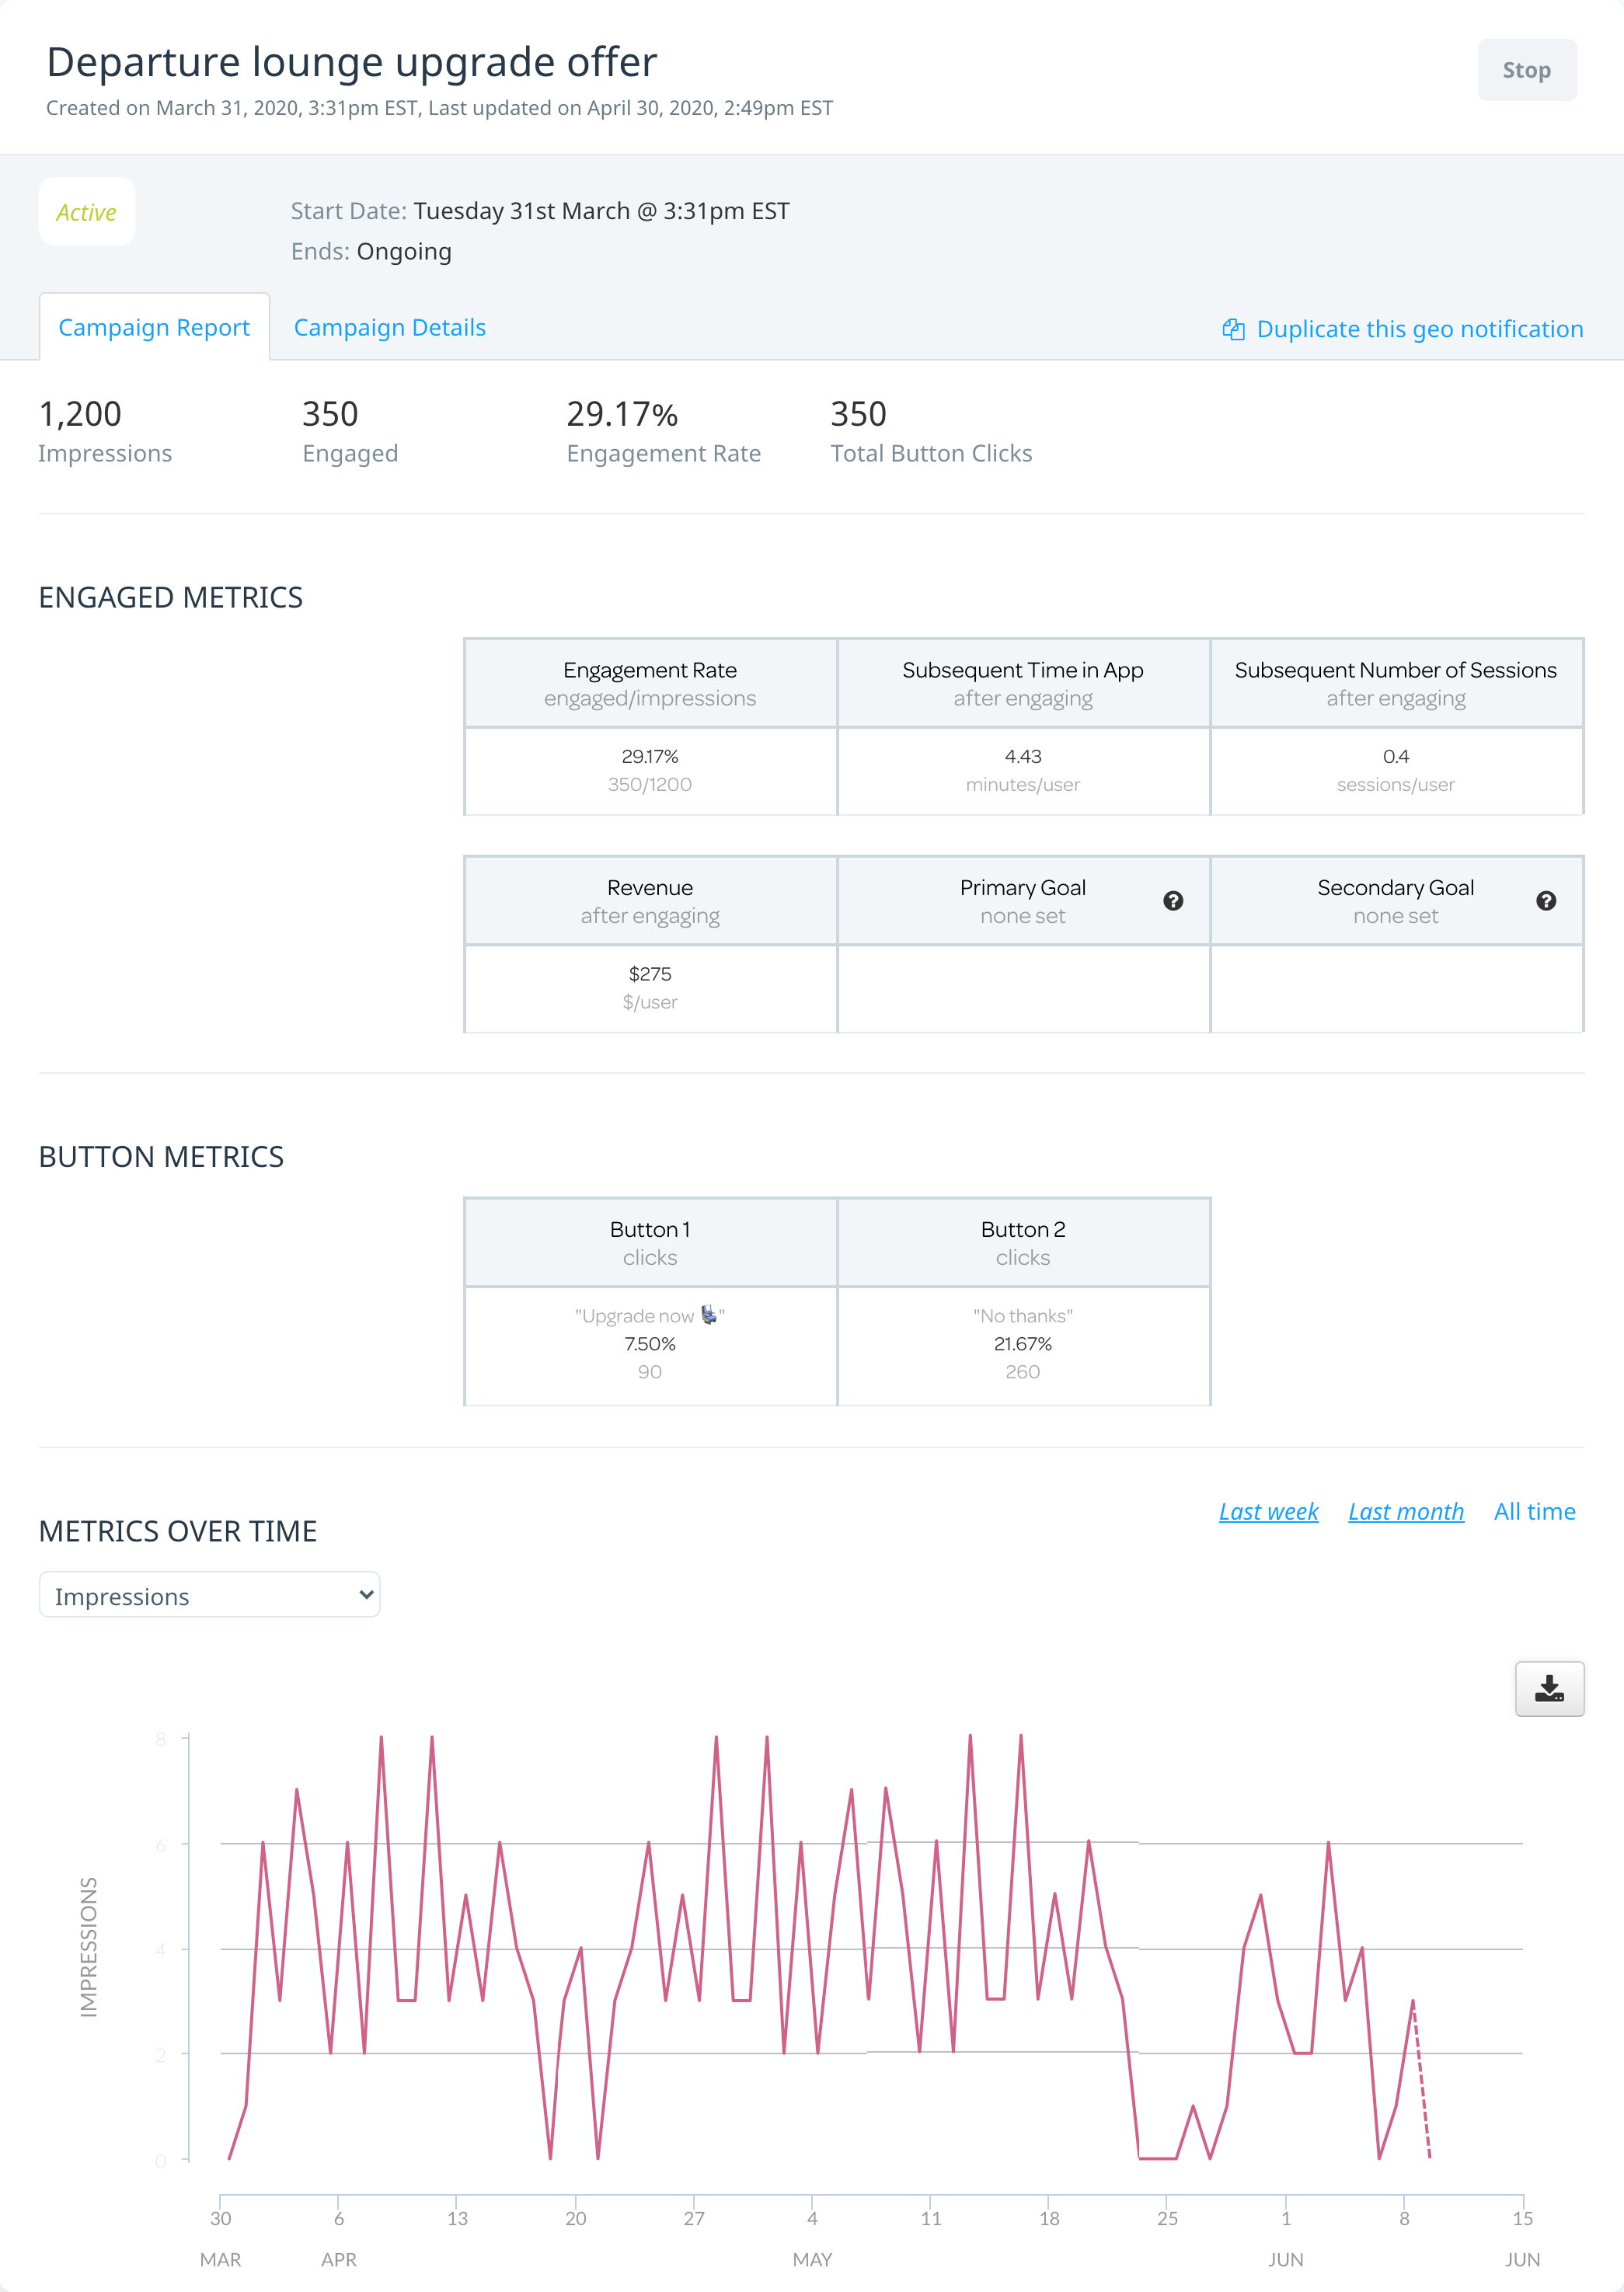 Sample geo campaign report showing high-level metrics, engagement and button metrics, and a graph of the metrics over time